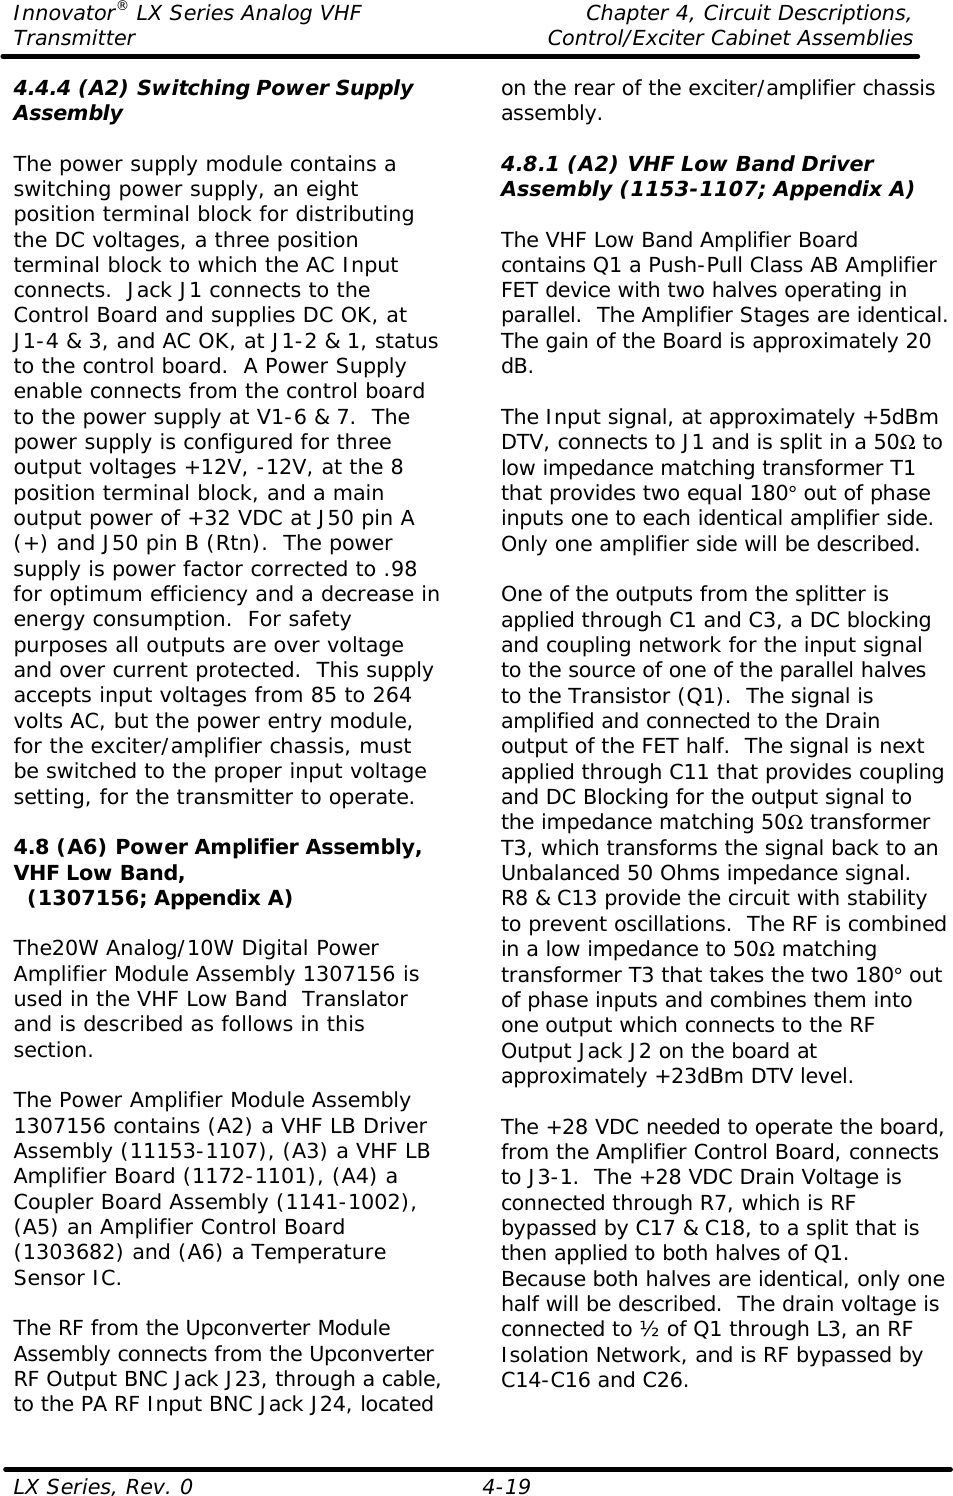 Innovator® LX Series Analog VHF    Chapter 4, Circuit Descriptions, Transmitter Control/Exciter Cabinet Assemblies  LX Series, Rev. 0    4-19 4.4.4 (A2) Switching Power Supply Assembly  The power supply module contains a switching power supply, an eight position terminal block for distributing the DC voltages, a three position terminal block to which the AC Input connects.  Jack J1 connects to the Control Board and supplies DC OK, at J1-4 &amp; 3, and AC OK, at J1-2 &amp; 1, status to the control board.  A Power Supply enable connects from the control board to the power supply at V1-6 &amp; 7.  The power supply is configured for three output voltages +12V, -12V, at the 8 position terminal block, and a main output power of +32 VDC at J50 pin A (+) and J50 pin B (Rtn).  The power supply is power factor corrected to .98 for optimum efficiency and a decrease in energy consumption.  For safety purposes all outputs are over voltage and over current protected.  This supply accepts input voltages from 85 to 264 volts AC, but the power entry module, for the exciter/amplifier chassis, must be switched to the proper input voltage setting, for the transmitter to operate.  4.8 (A6) Power Amplifier Assembly, VHF Low Band,   (1307156; Appendix A)  The20W Analog/10W Digital Power Amplifier Module Assembly 1307156 is used in the VHF Low Band  Translator and is described as follows in this section.  The Power Amplifier Module Assembly 1307156 contains (A2) a VHF LB Driver Assembly (11153-1107), (A3) a VHF LB Amplifier Board (1172-1101), (A4) a Coupler Board Assembly (1141-1002), (A5) an Amplifier Control Board (1303682) and (A6) a Temperature Sensor IC.  The RF from the Upconverter Module Assembly connects from the Upconverter RF Output BNC Jack J23, through a cable, to the PA RF Input BNC Jack J24, located on the rear of the exciter/amplifier chassis assembly.  4.8.1 (A2) VHF Low Band Driver Assembly (1153-1107; Appendix A)  The VHF Low Band Amplifier Board contains Q1 a Push-Pull Class AB Amplifier FET device with two halves operating in parallel.  The Amplifier Stages are identical.  The gain of the Board is approximately 20 dB.  The Input signal, at approximately +5dBm DTV, connects to J1 and is split in a 50Ω to low impedance matching transformer T1 that provides two equal 180° out of phase inputs one to each identical amplifier side.  Only one amplifier side will be described.  One of the outputs from the splitter is applied through C1 and C3, a DC blocking and coupling network for the input signal to the source of one of the parallel halves to the Transistor (Q1).  The signal is amplified and connected to the Drain output of the FET half.  The signal is next applied through C11 that provides coupling and DC Blocking for the output signal to the impedance matching 50Ω transformer T3, which transforms the signal back to an Unbalanced 50 Ohms impedance signal.  R8 &amp; C13 provide the circuit with stability to prevent oscillations.  The RF is combined in a low impedance to 50Ω matching transformer T3 that takes the two 180° out of phase inputs and combines them into one output which connects to the RF Output Jack J2 on the board at approximately +23dBm DTV level.  The +28 VDC needed to operate the board, from the Amplifier Control Board, connects to J3-1.  The +28 VDC Drain Voltage is connected through R7, which is RF bypassed by C17 &amp; C18, to a split that is then applied to both halves of Q1.  Because both halves are identical, only one half will be described.  The drain voltage is connected to ½ of Q1 through L3, an RF Isolation Network, and is RF bypassed by C14-C16 and C26.  